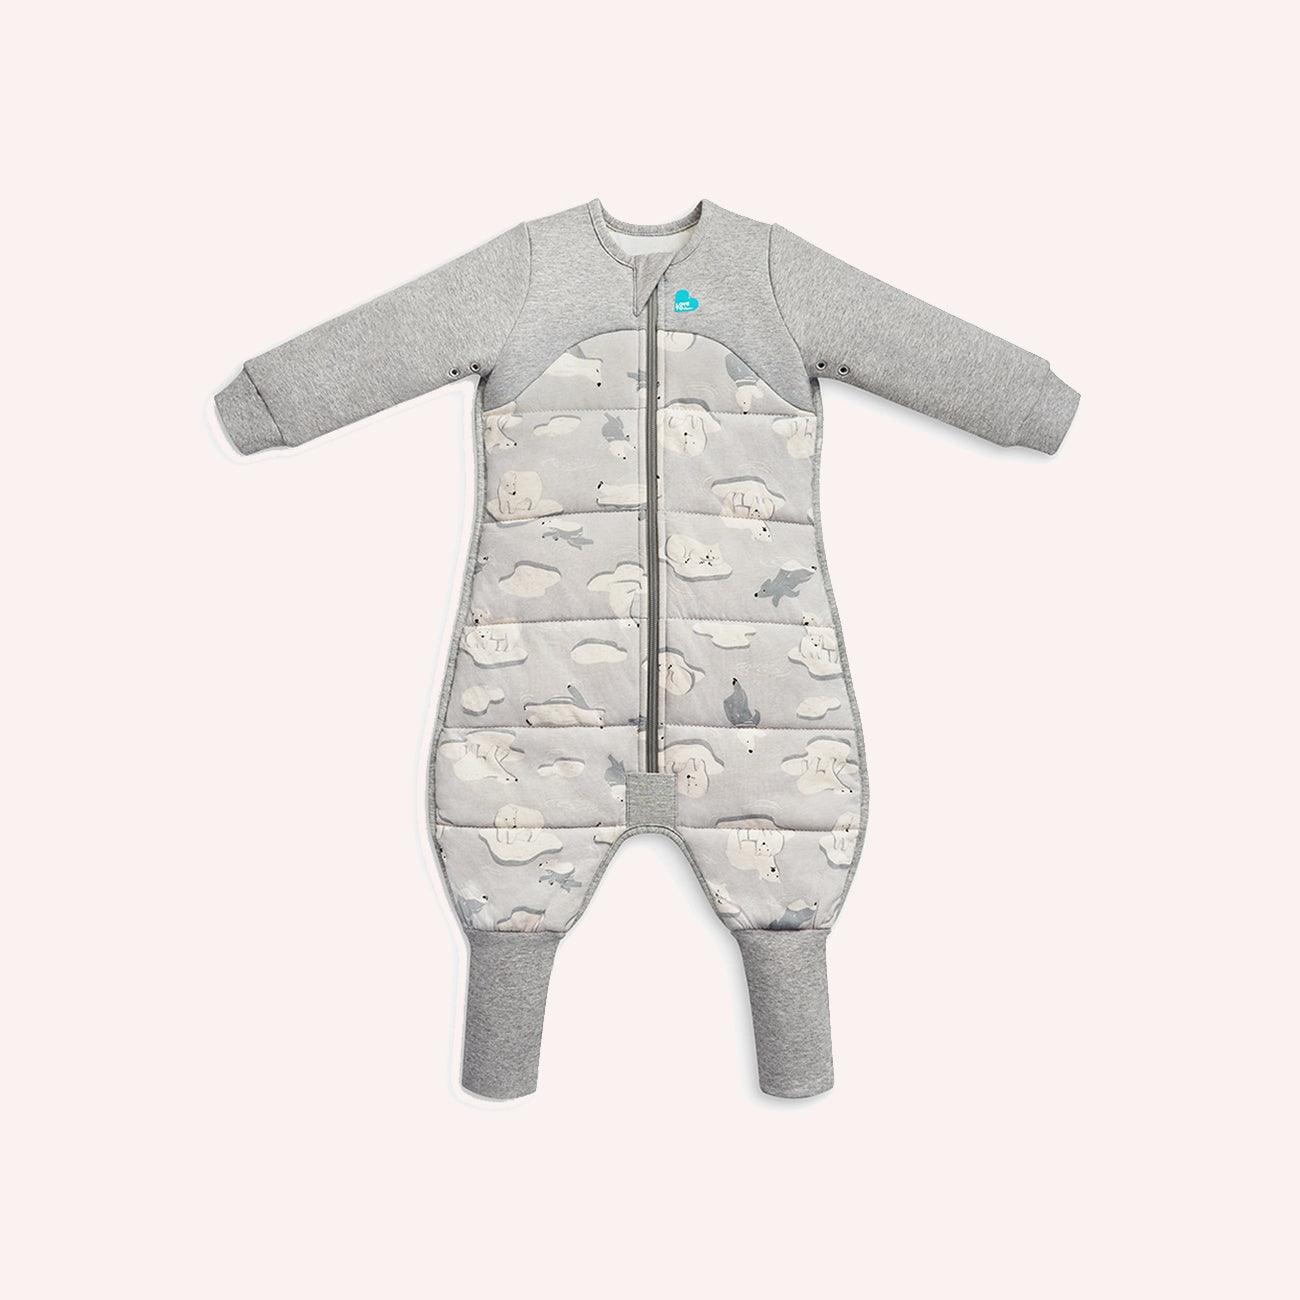 Stage 3 Sleepsuit - 3.5 TOG - Grey - South Pole